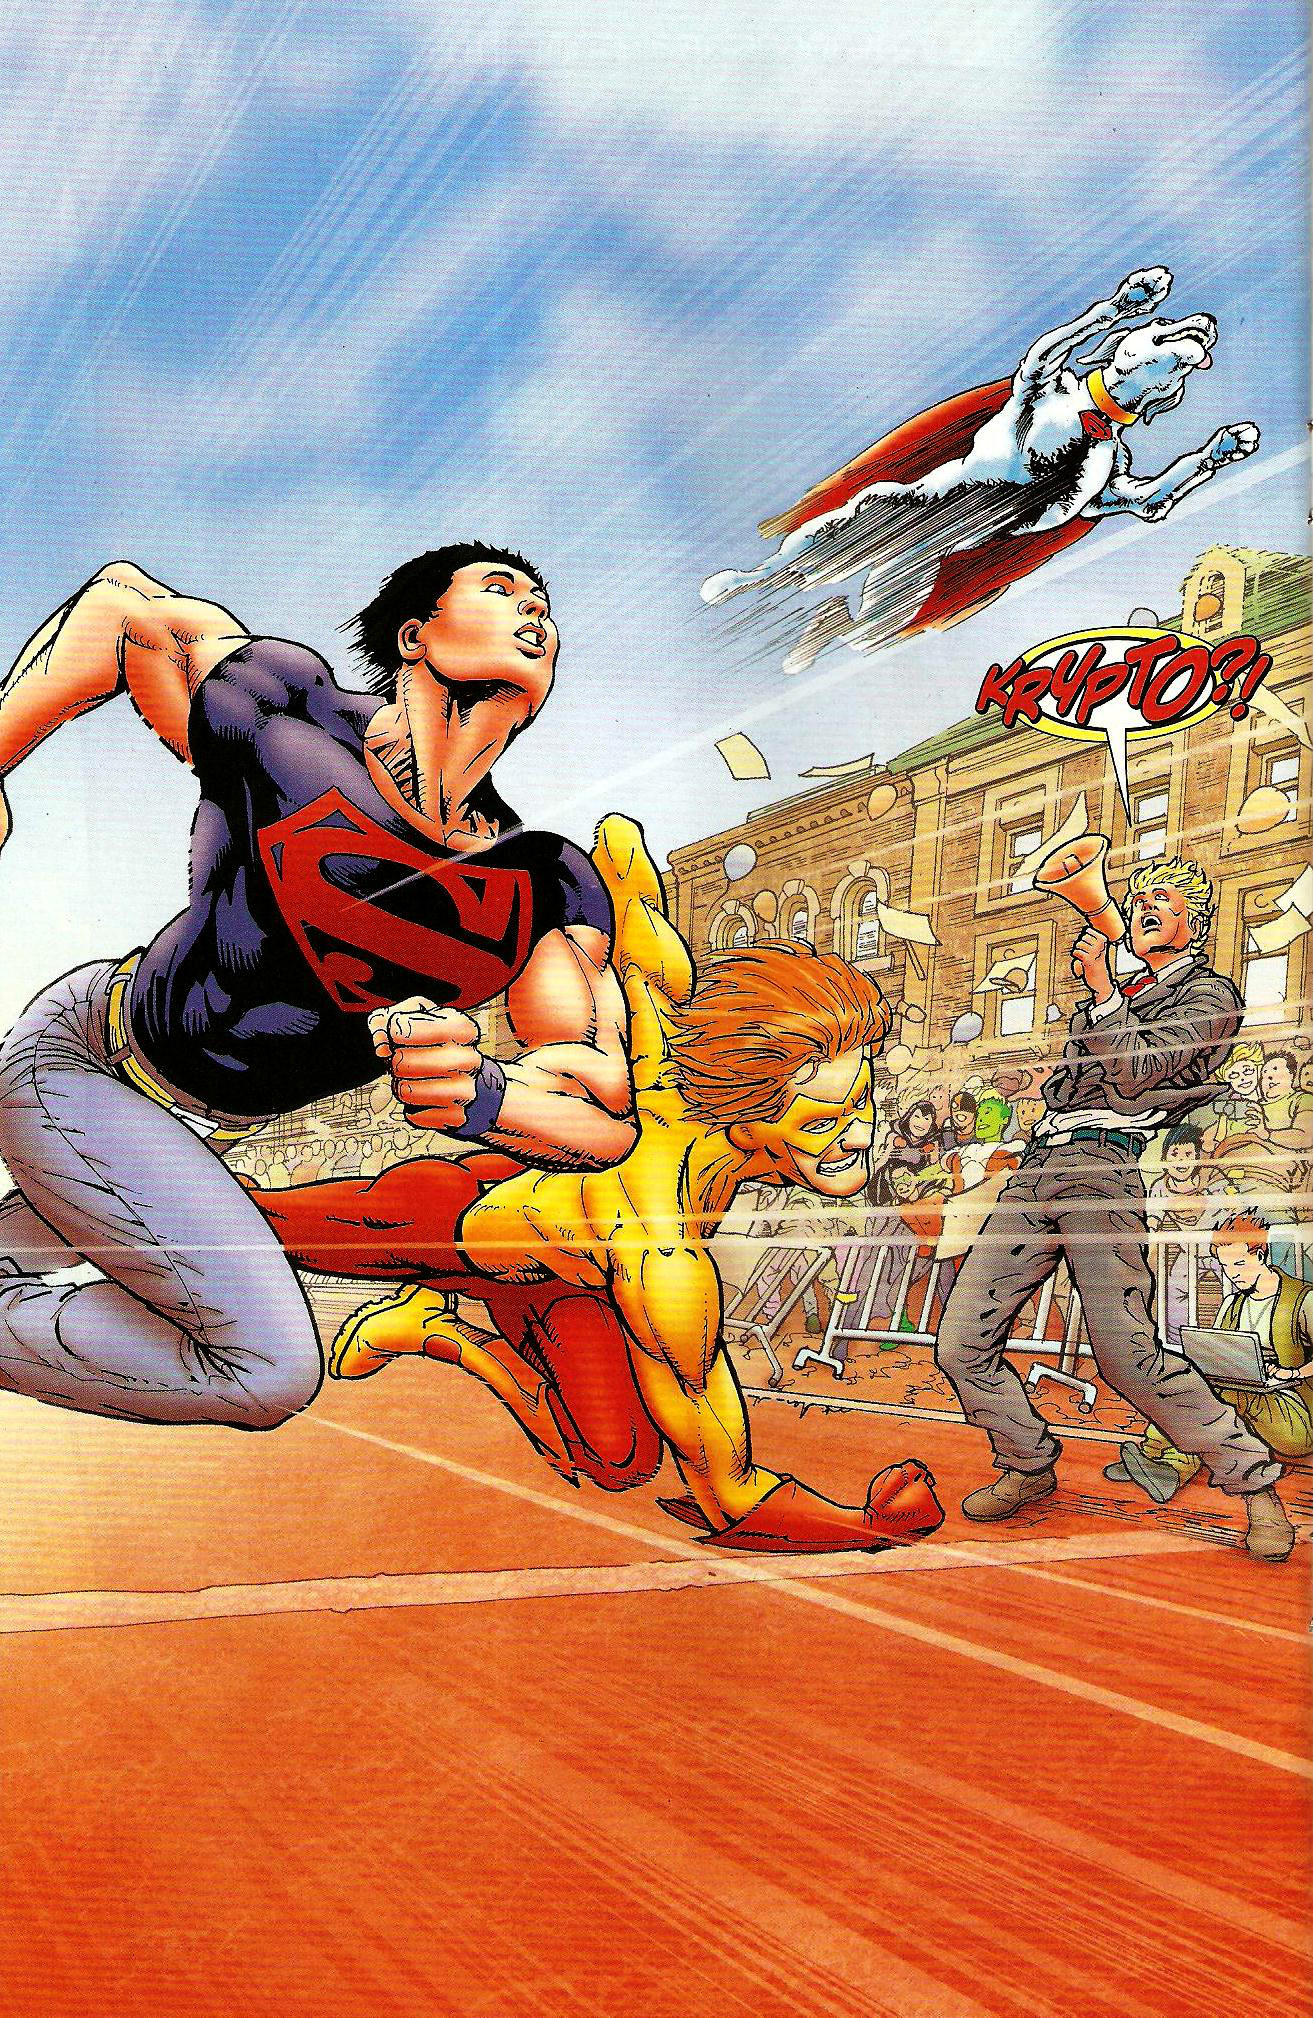 From Superboy (Vol. 4) #5 (2011)